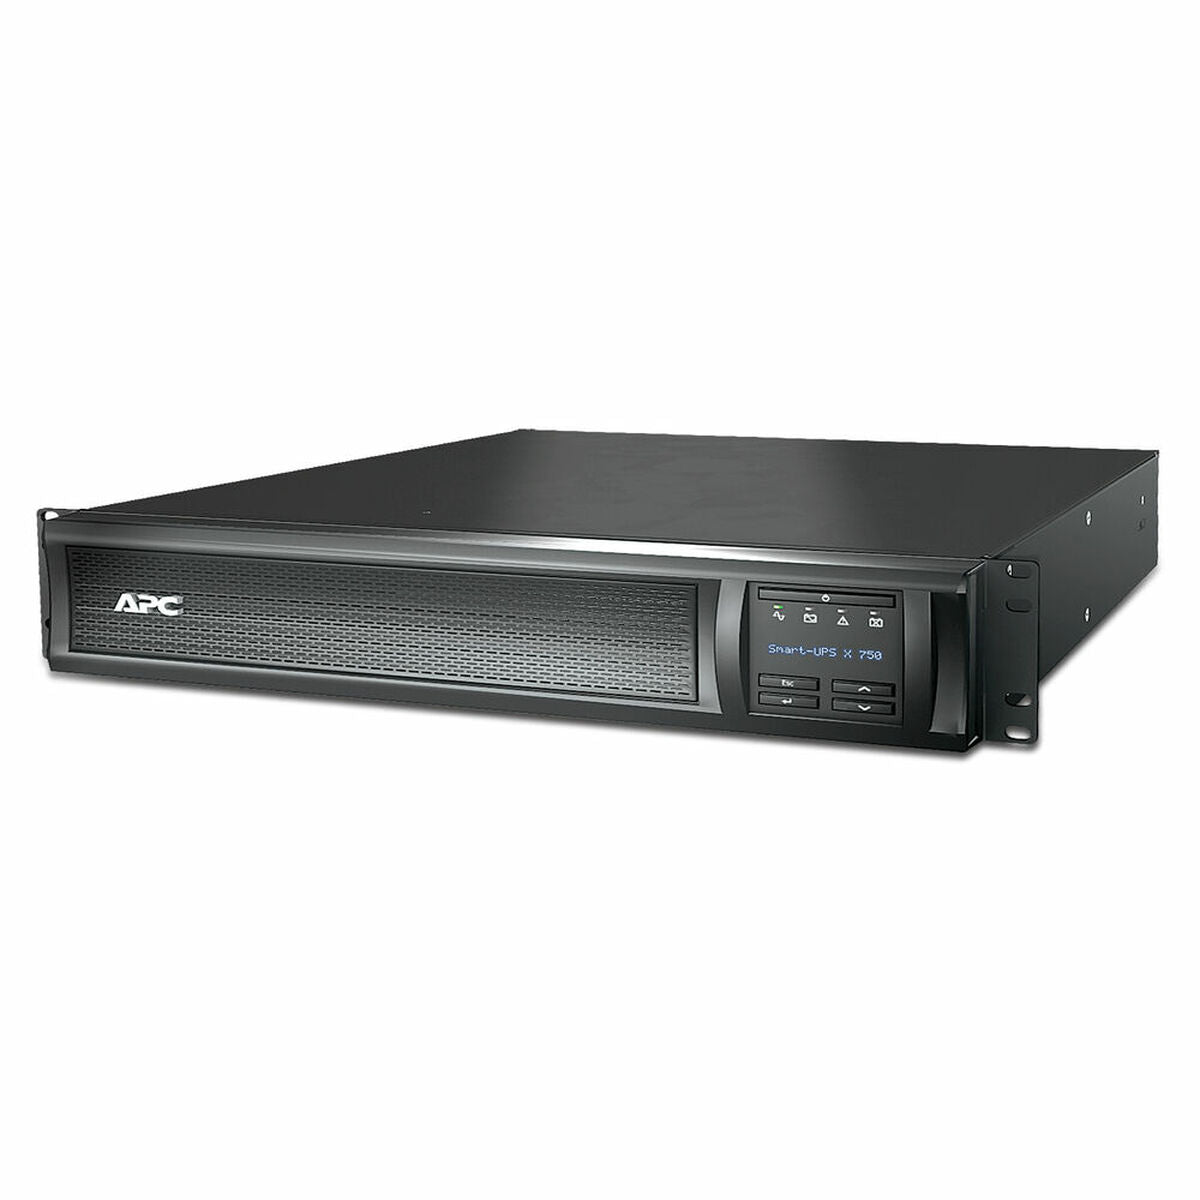 Uninterruptible Power Supply System Interactive UPS APC SMX750I, APC, Computing, Accessories, uninterruptible-power-supply-system-interactive-ups-apc-smx750i, Brand_APC, category-reference-2609, category-reference-2642, category-reference-2845, category-reference-t-19685, category-reference-t-19908, category-reference-t-21341, computers / peripherals, Condition_NEW, office, Price_800 - 900, RiotNook